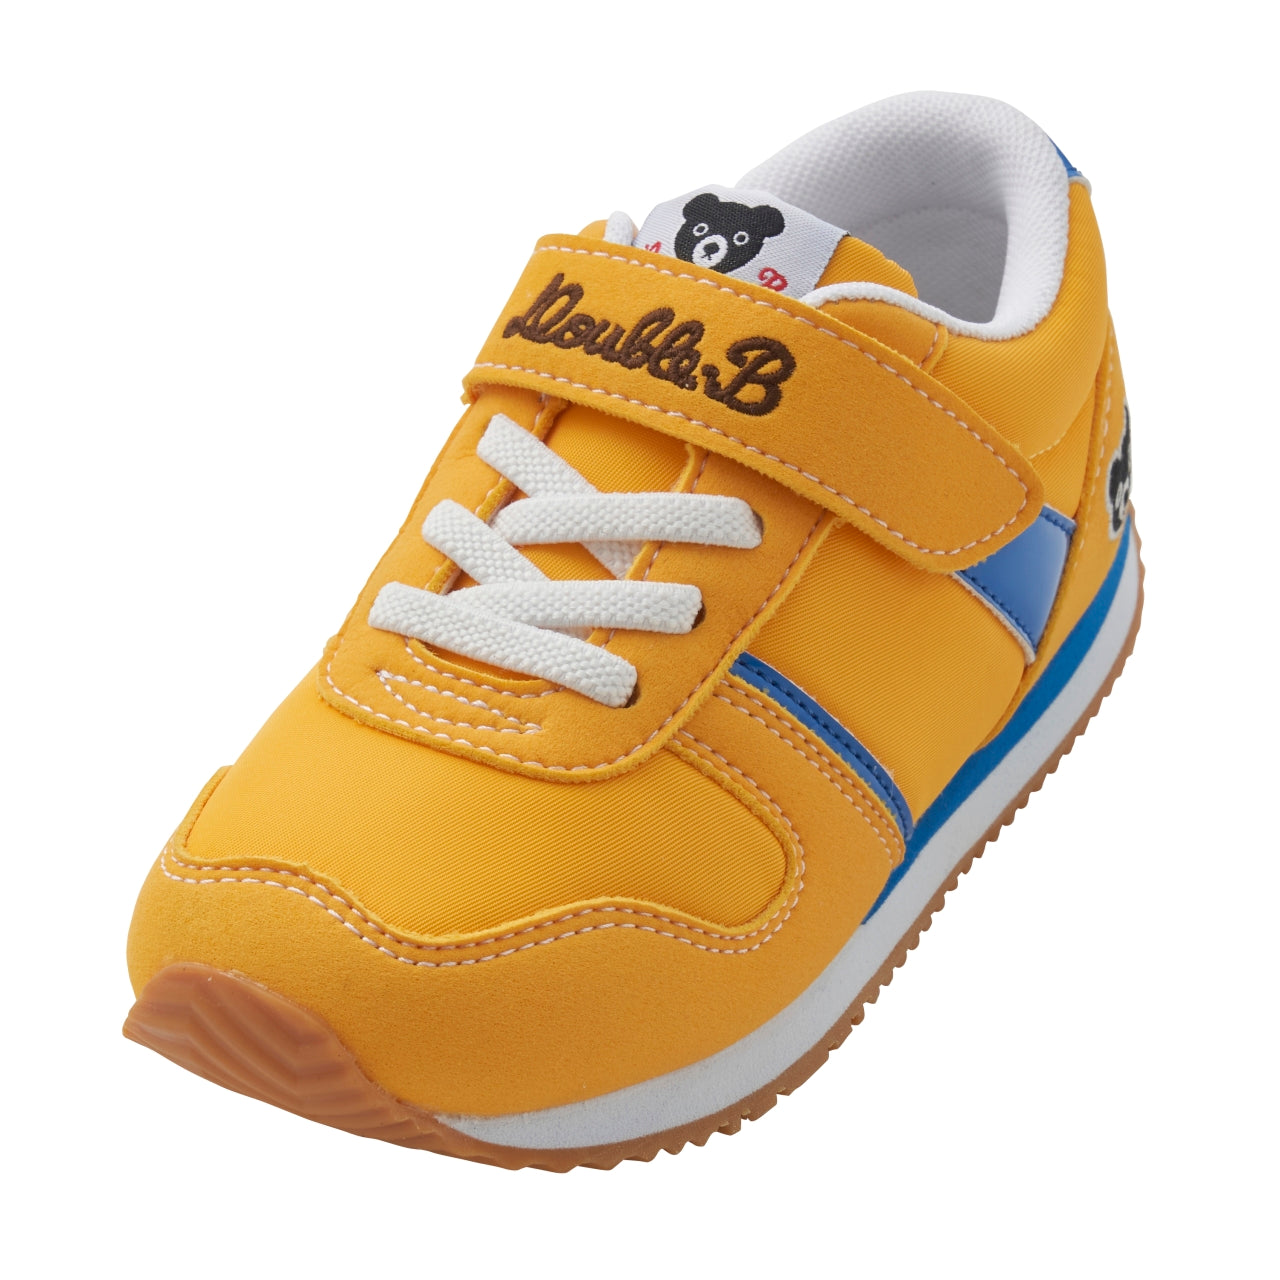 Retro Shoes for Kids